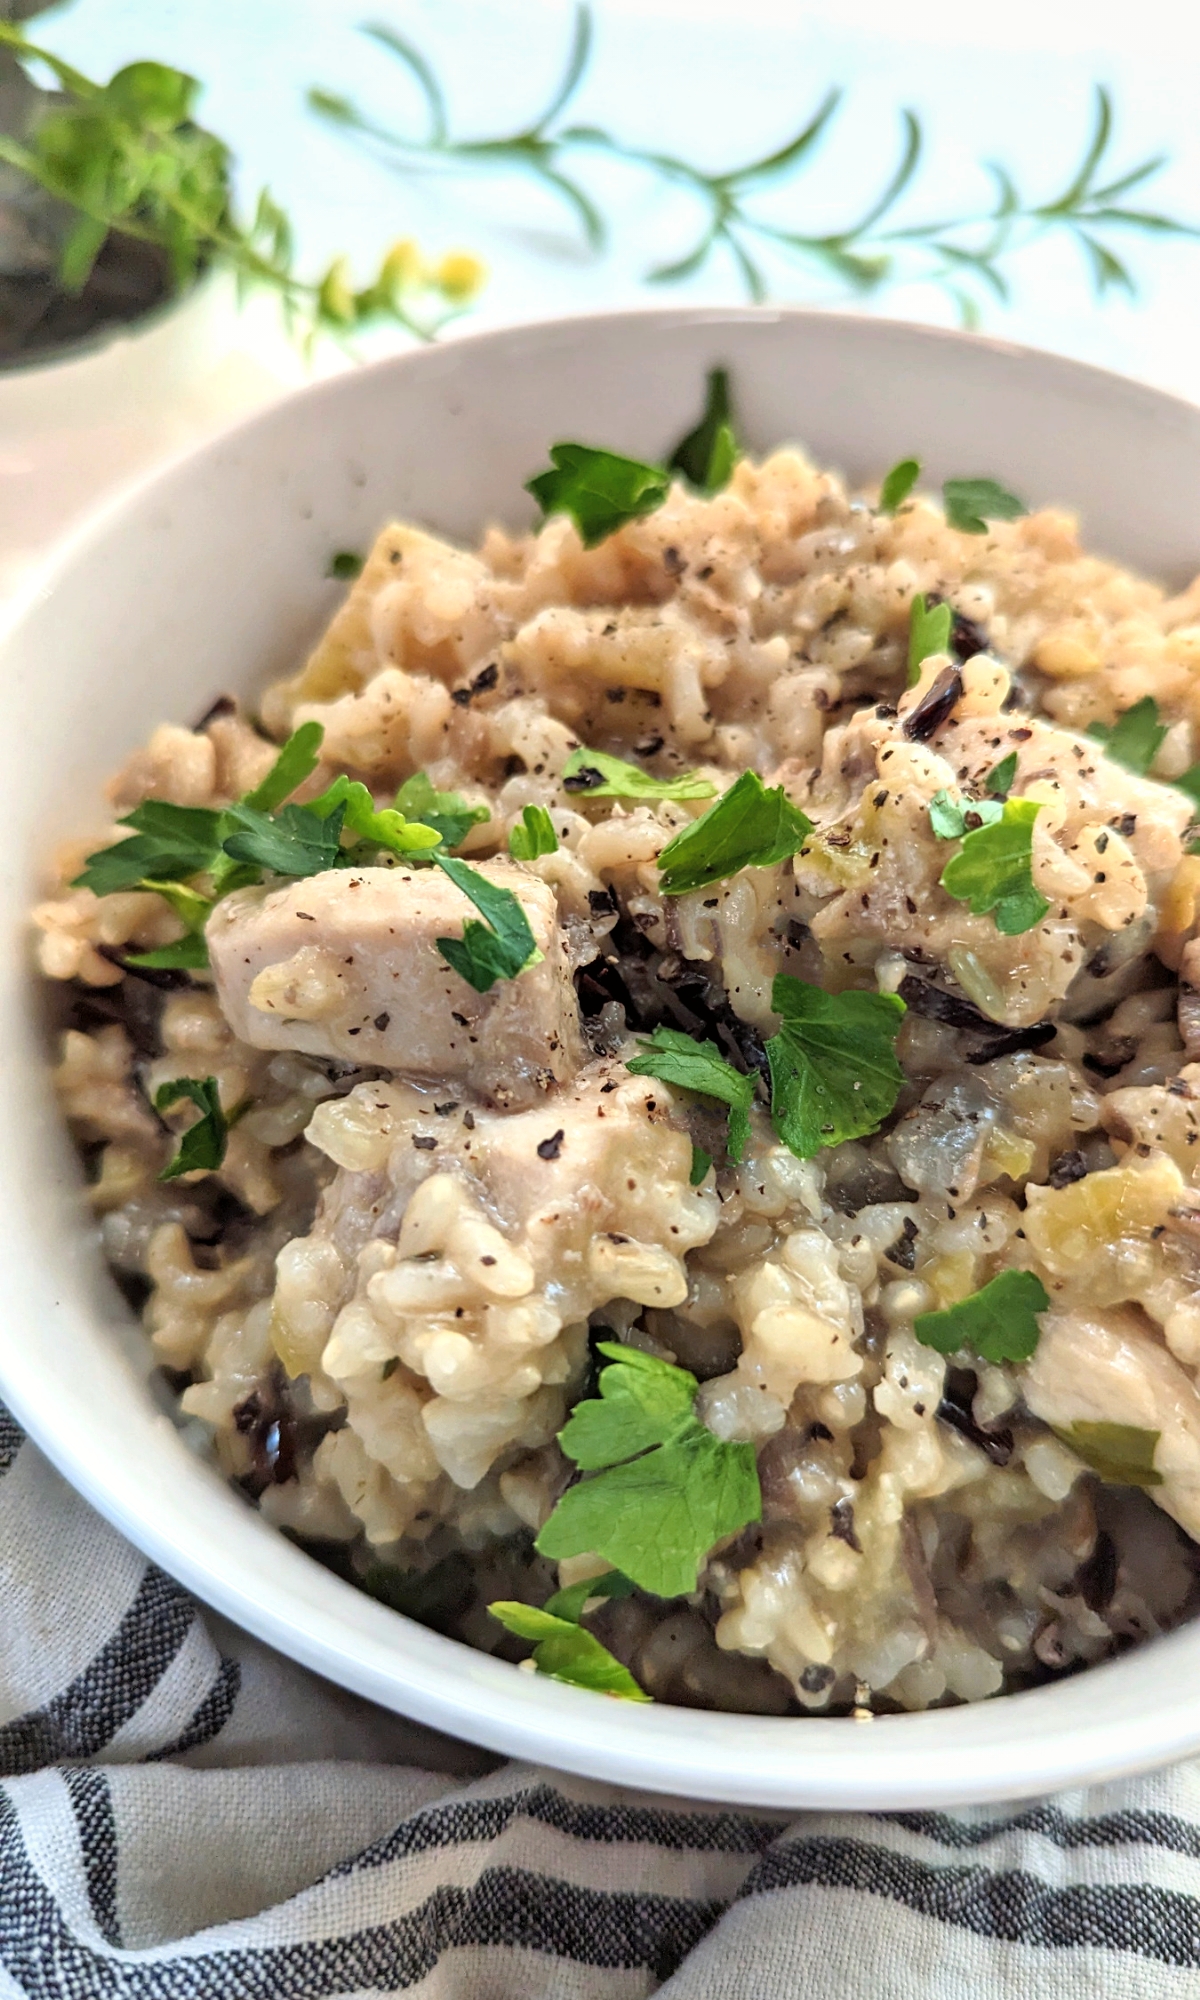 low sodium dinner ideas with chicken and rice easy low salt comfort food recipes with fresh herbs and lemon